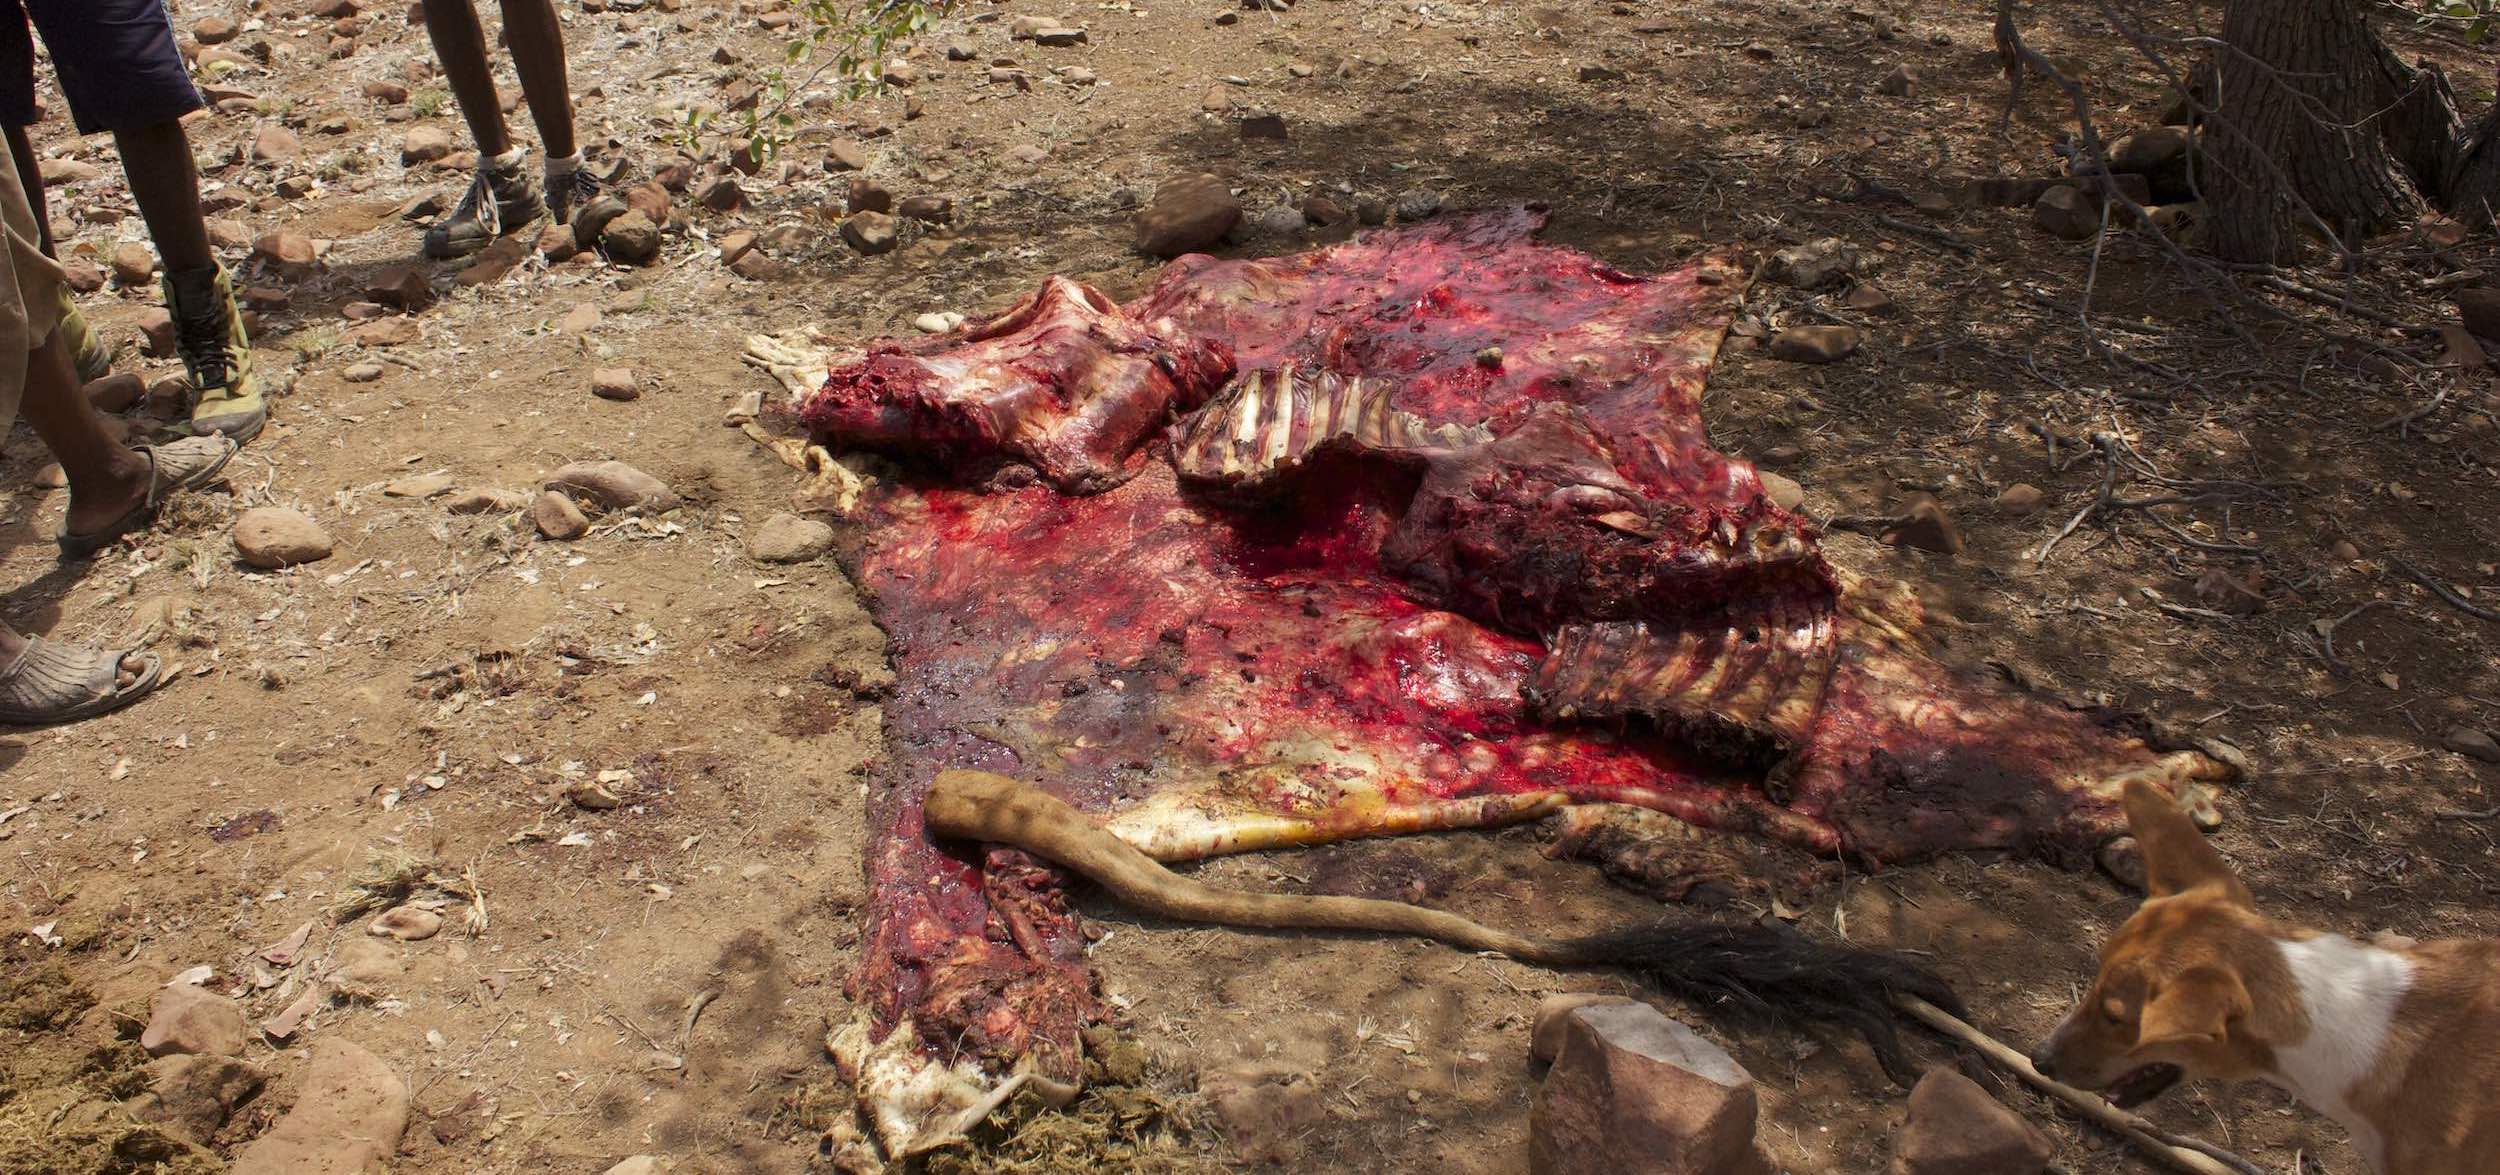 The remains of a cow lie on the ground.